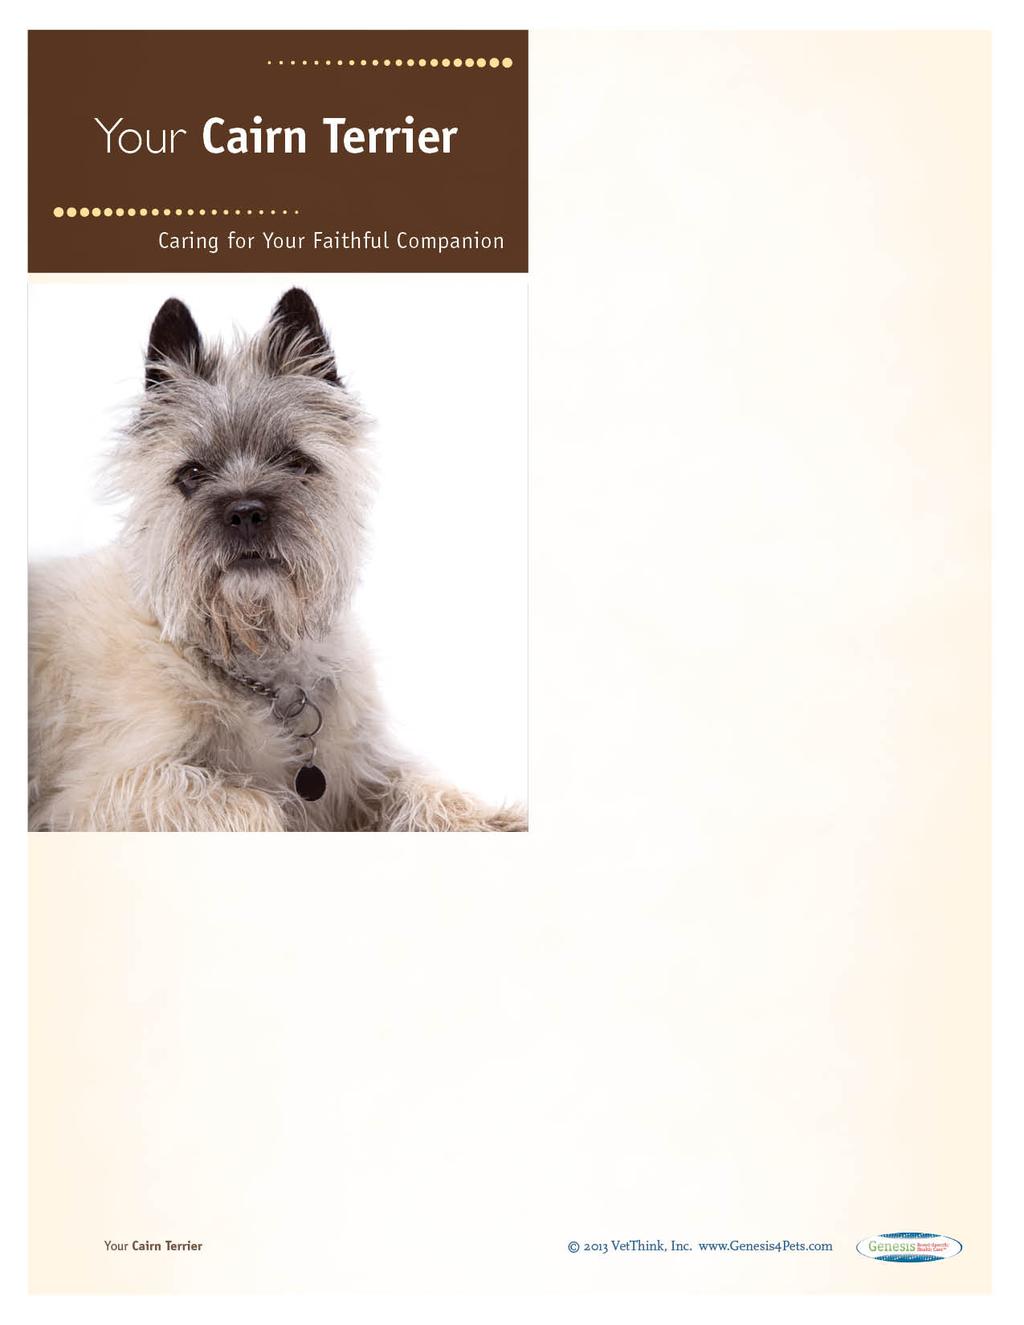 Cairn Terriers: What a Unique Breed! Your dog is special! She's your best friend, companion, and a source of unconditional love.